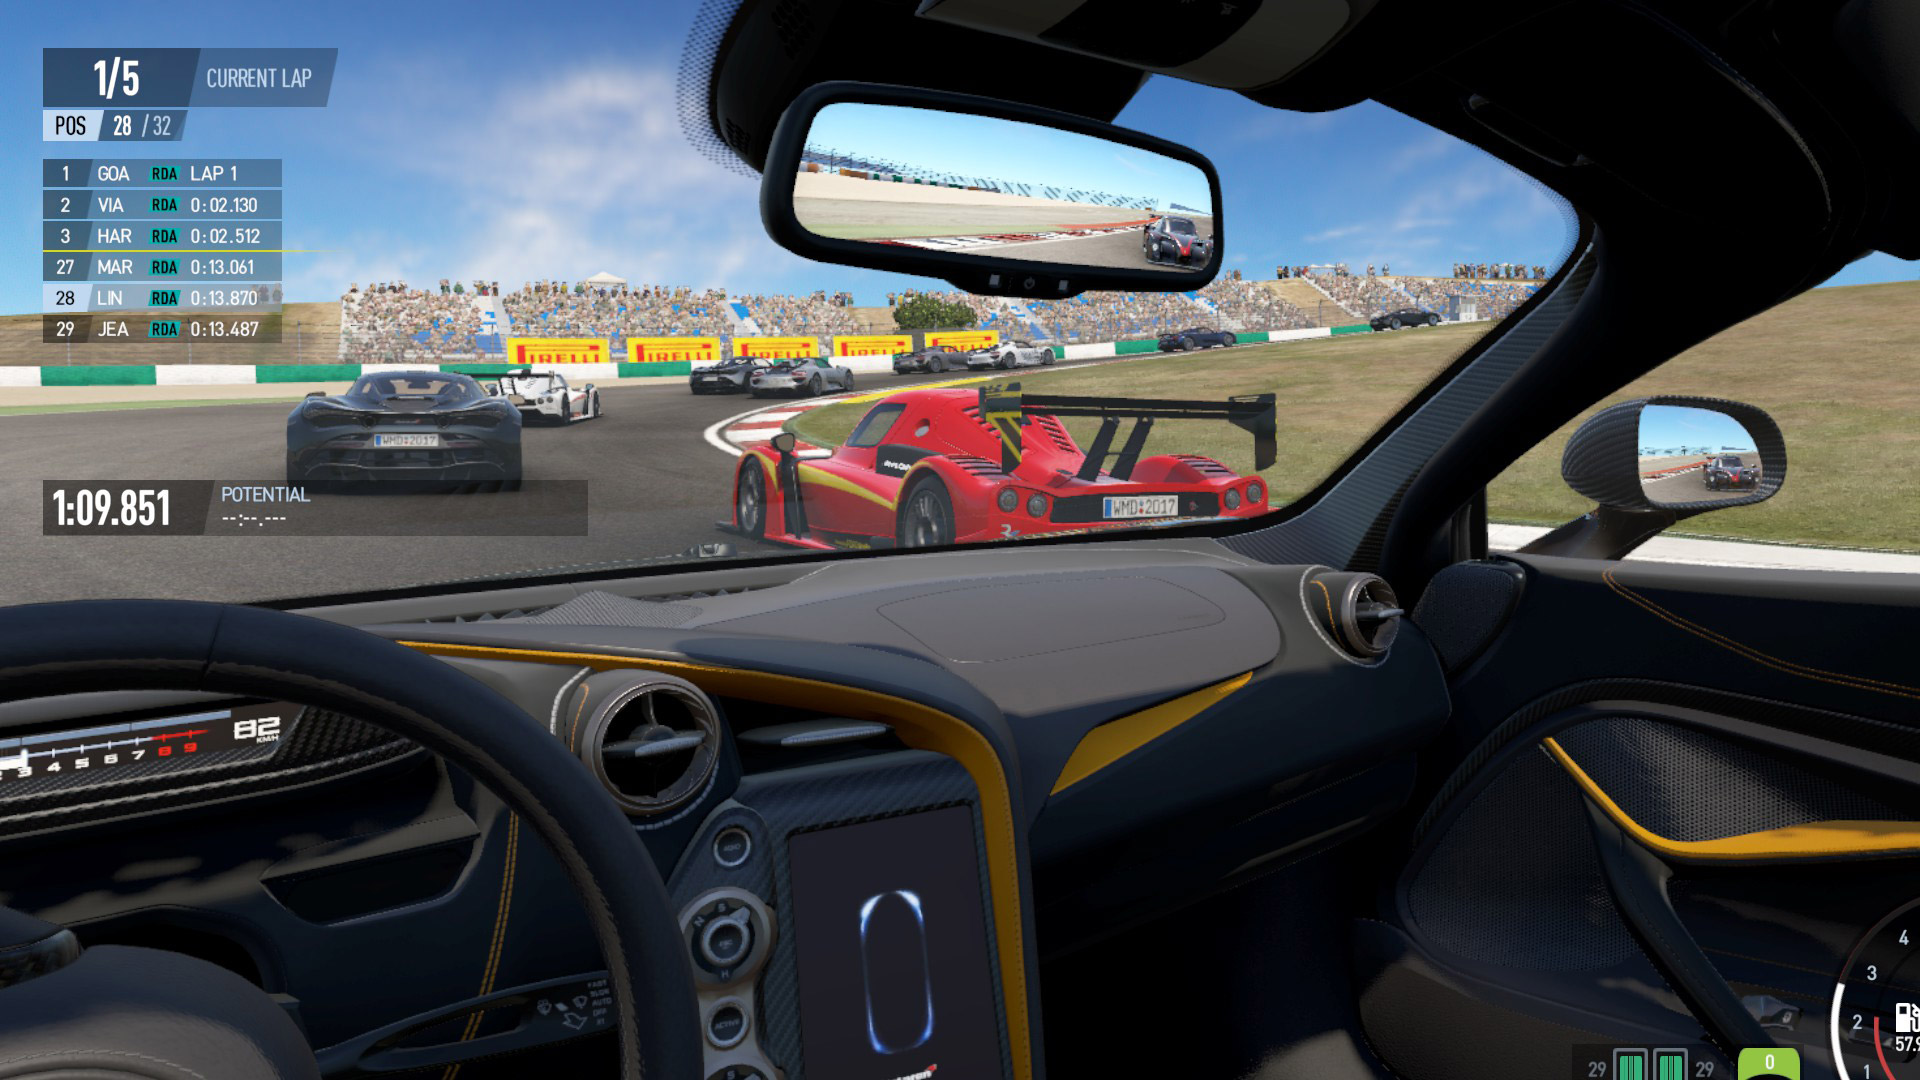 project cars 2 playstation vr